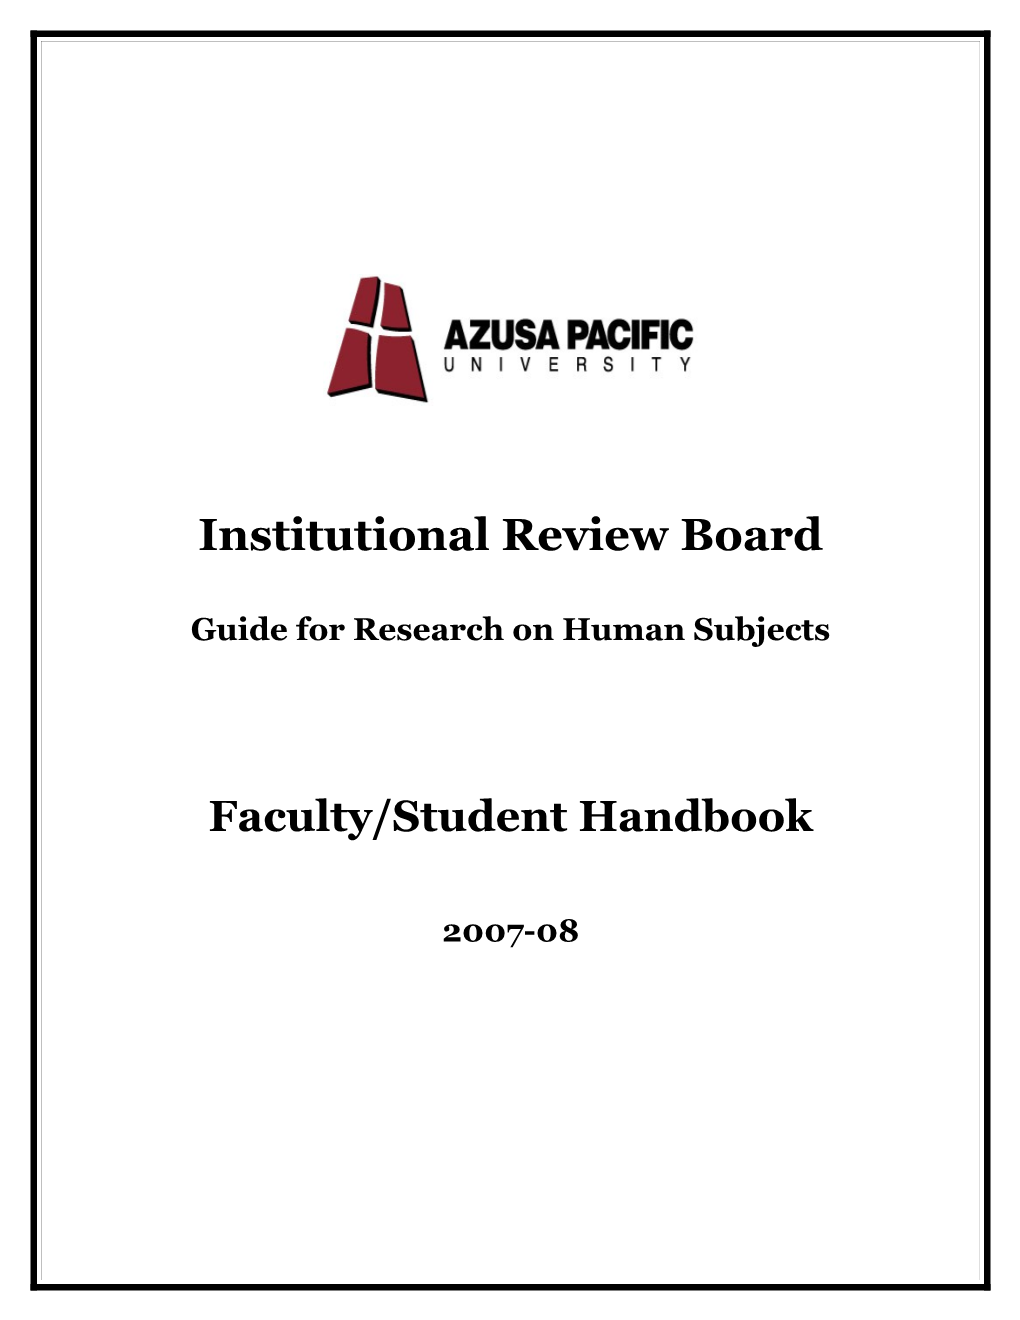 Guide for Research on Human Subjects